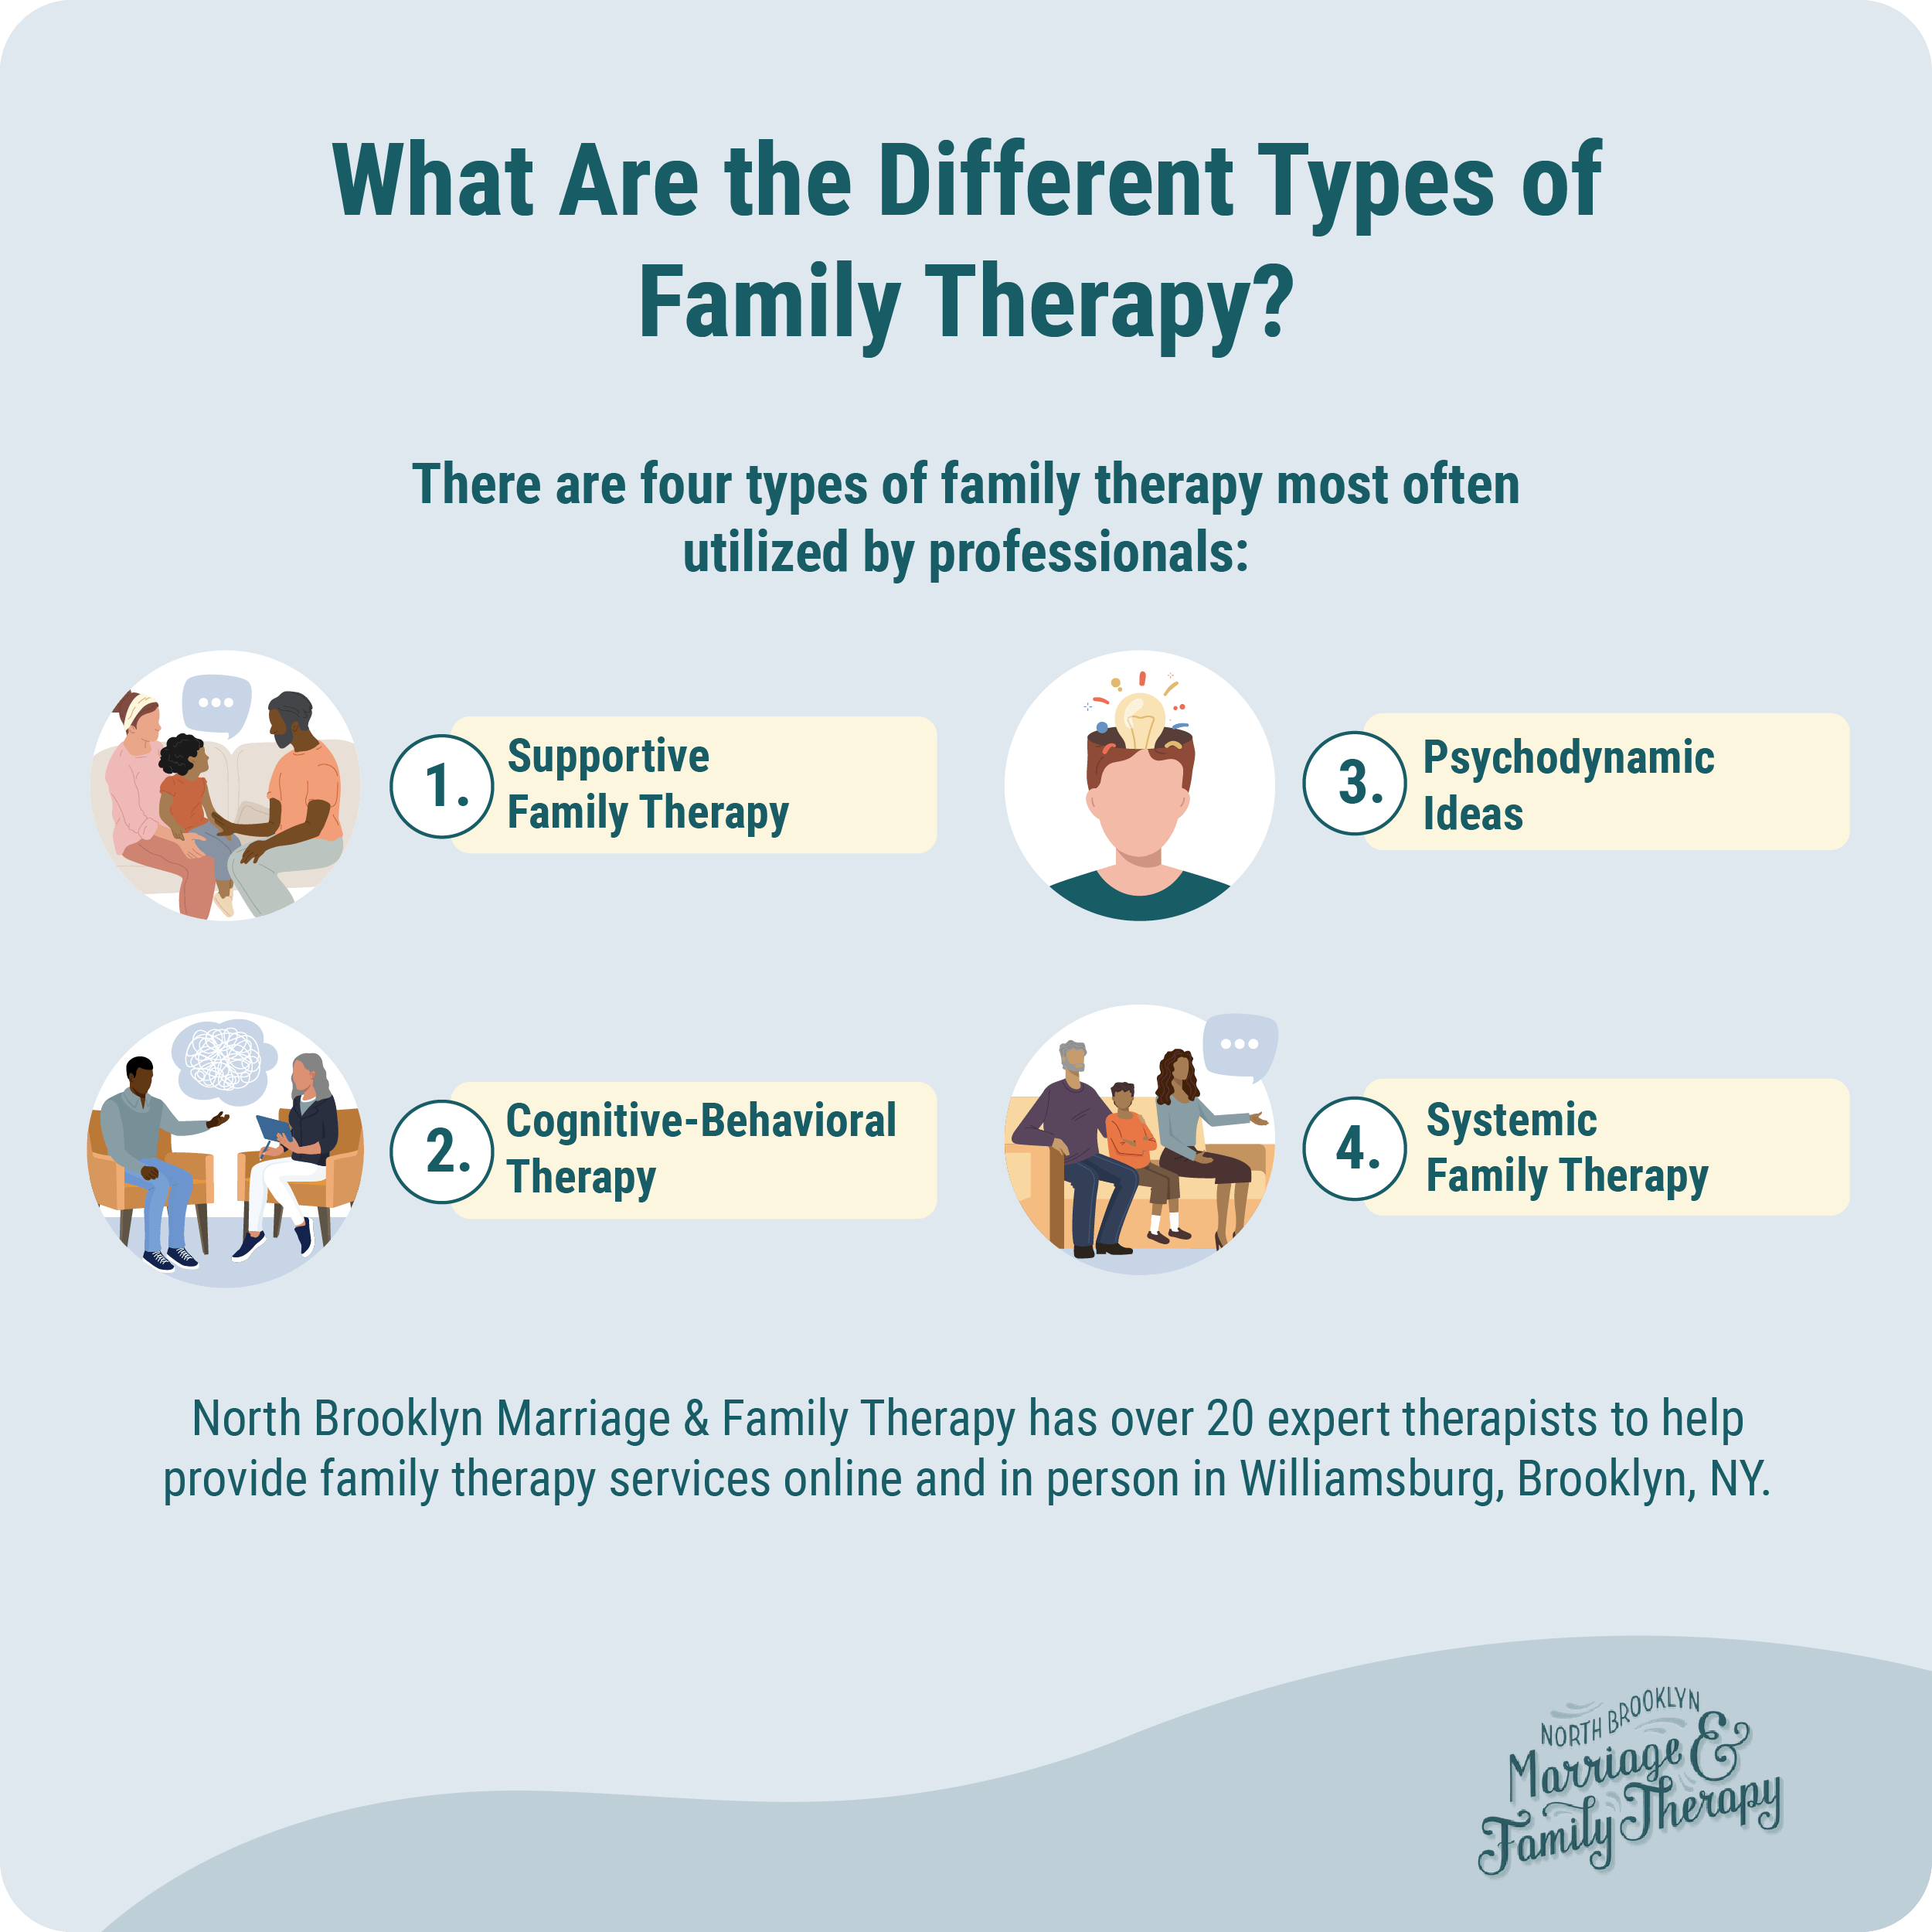 What are the common types of family therapy?